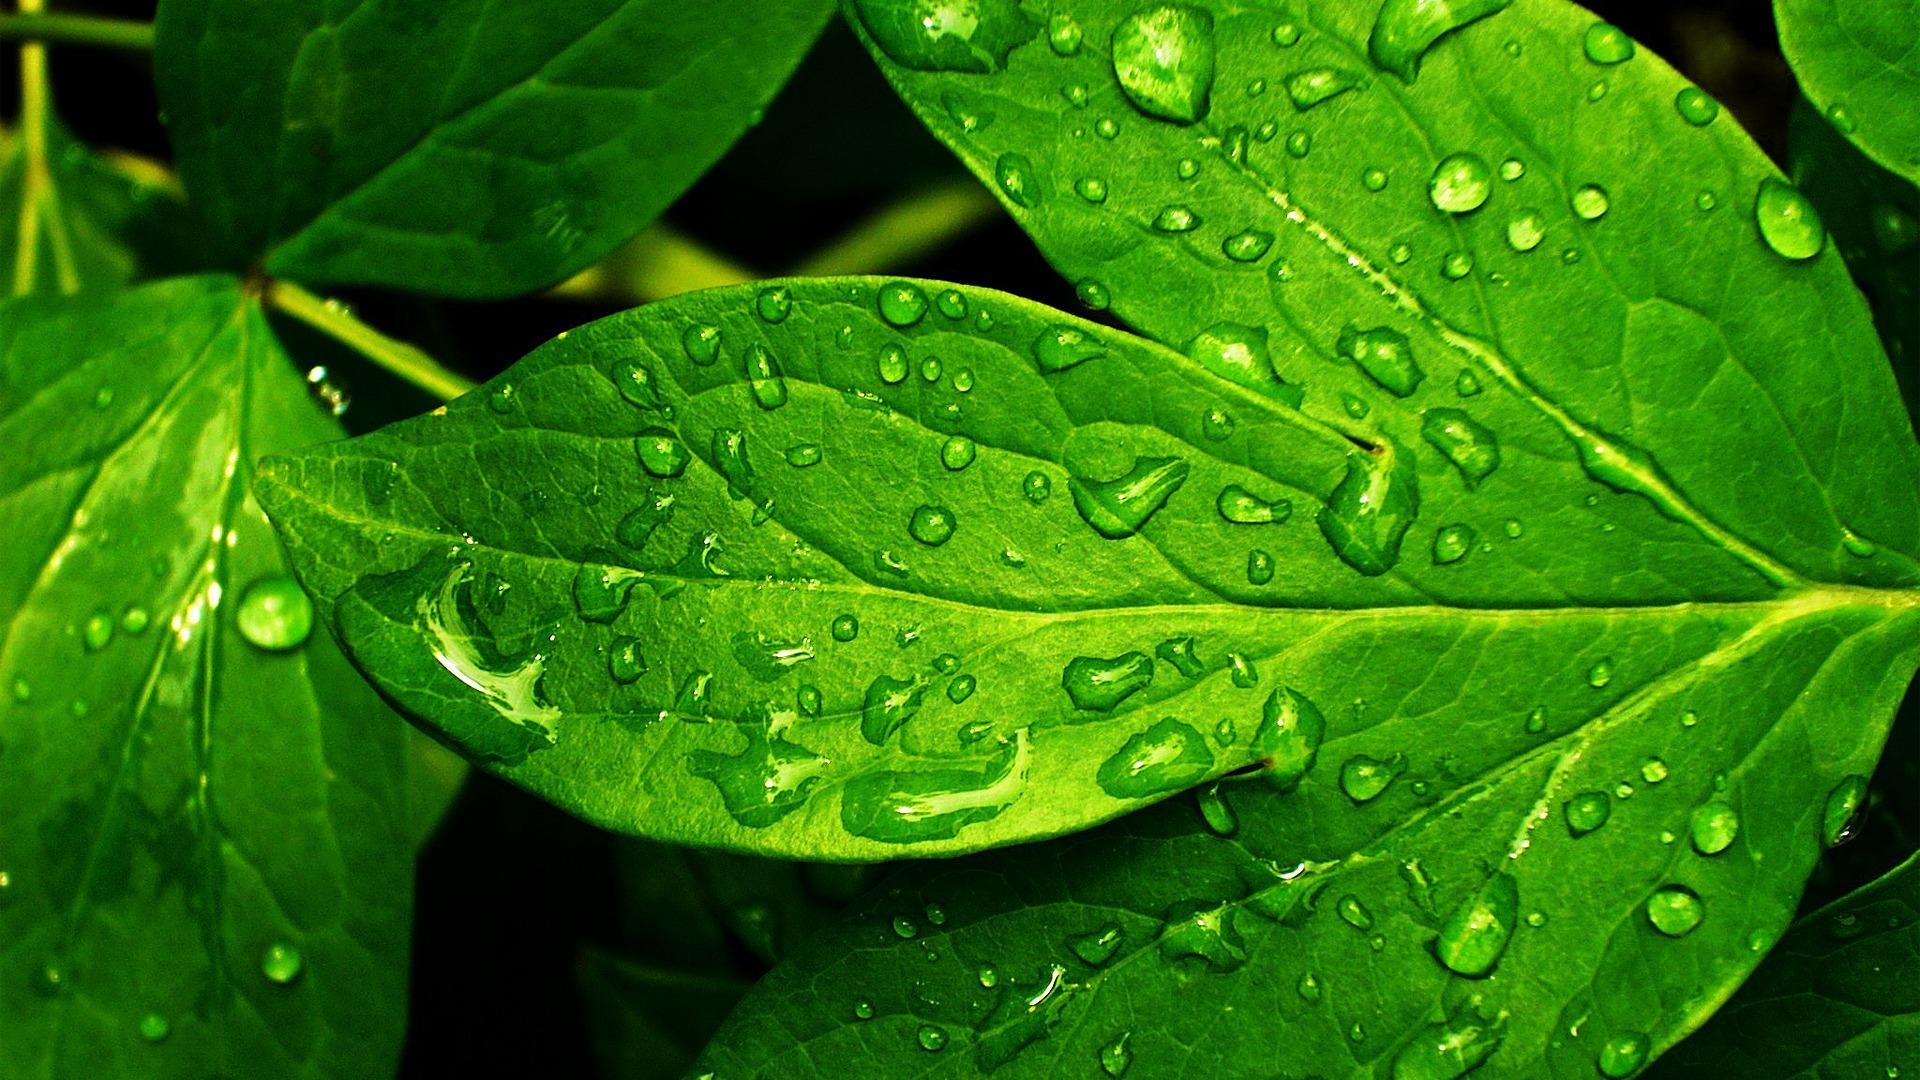 HD Green Wallpaper Background For Free Download